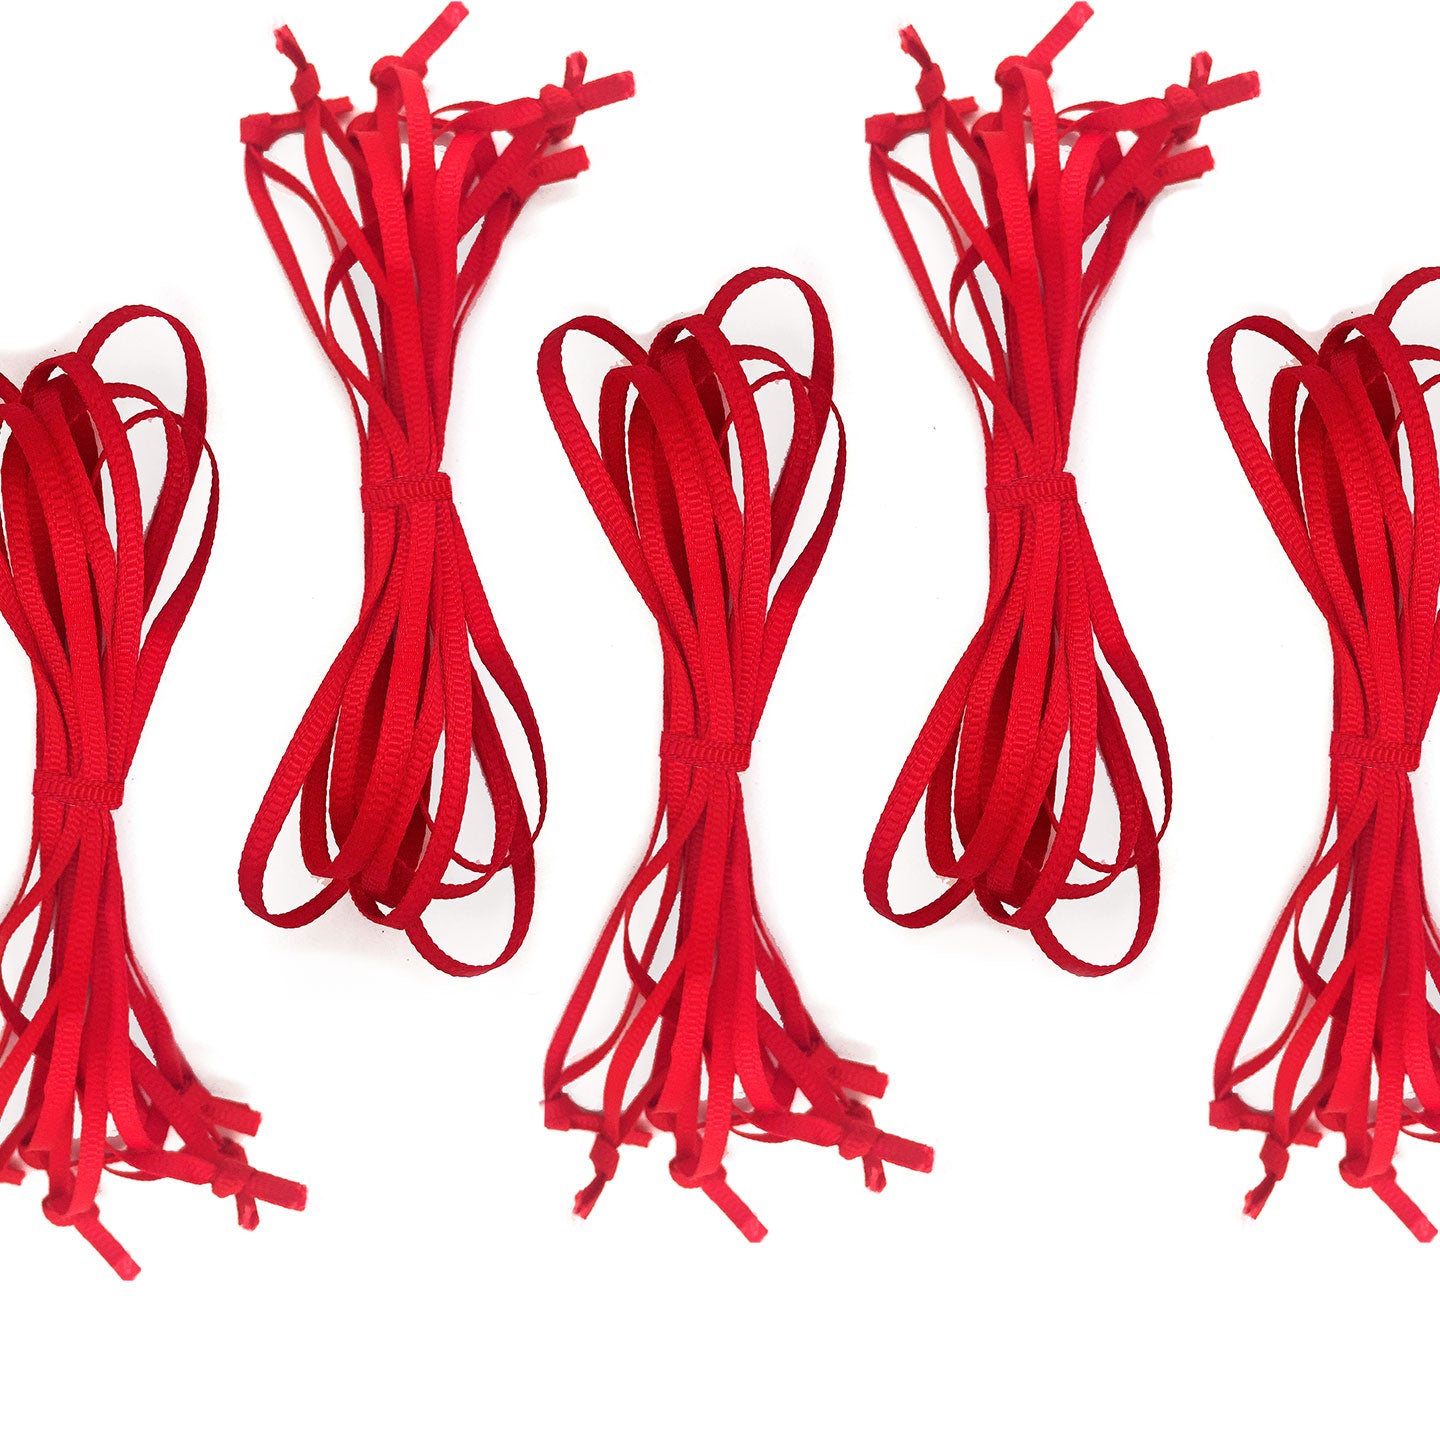 50 Pack Festive Red Ribbon Christmas Decoration Ornament Hangers